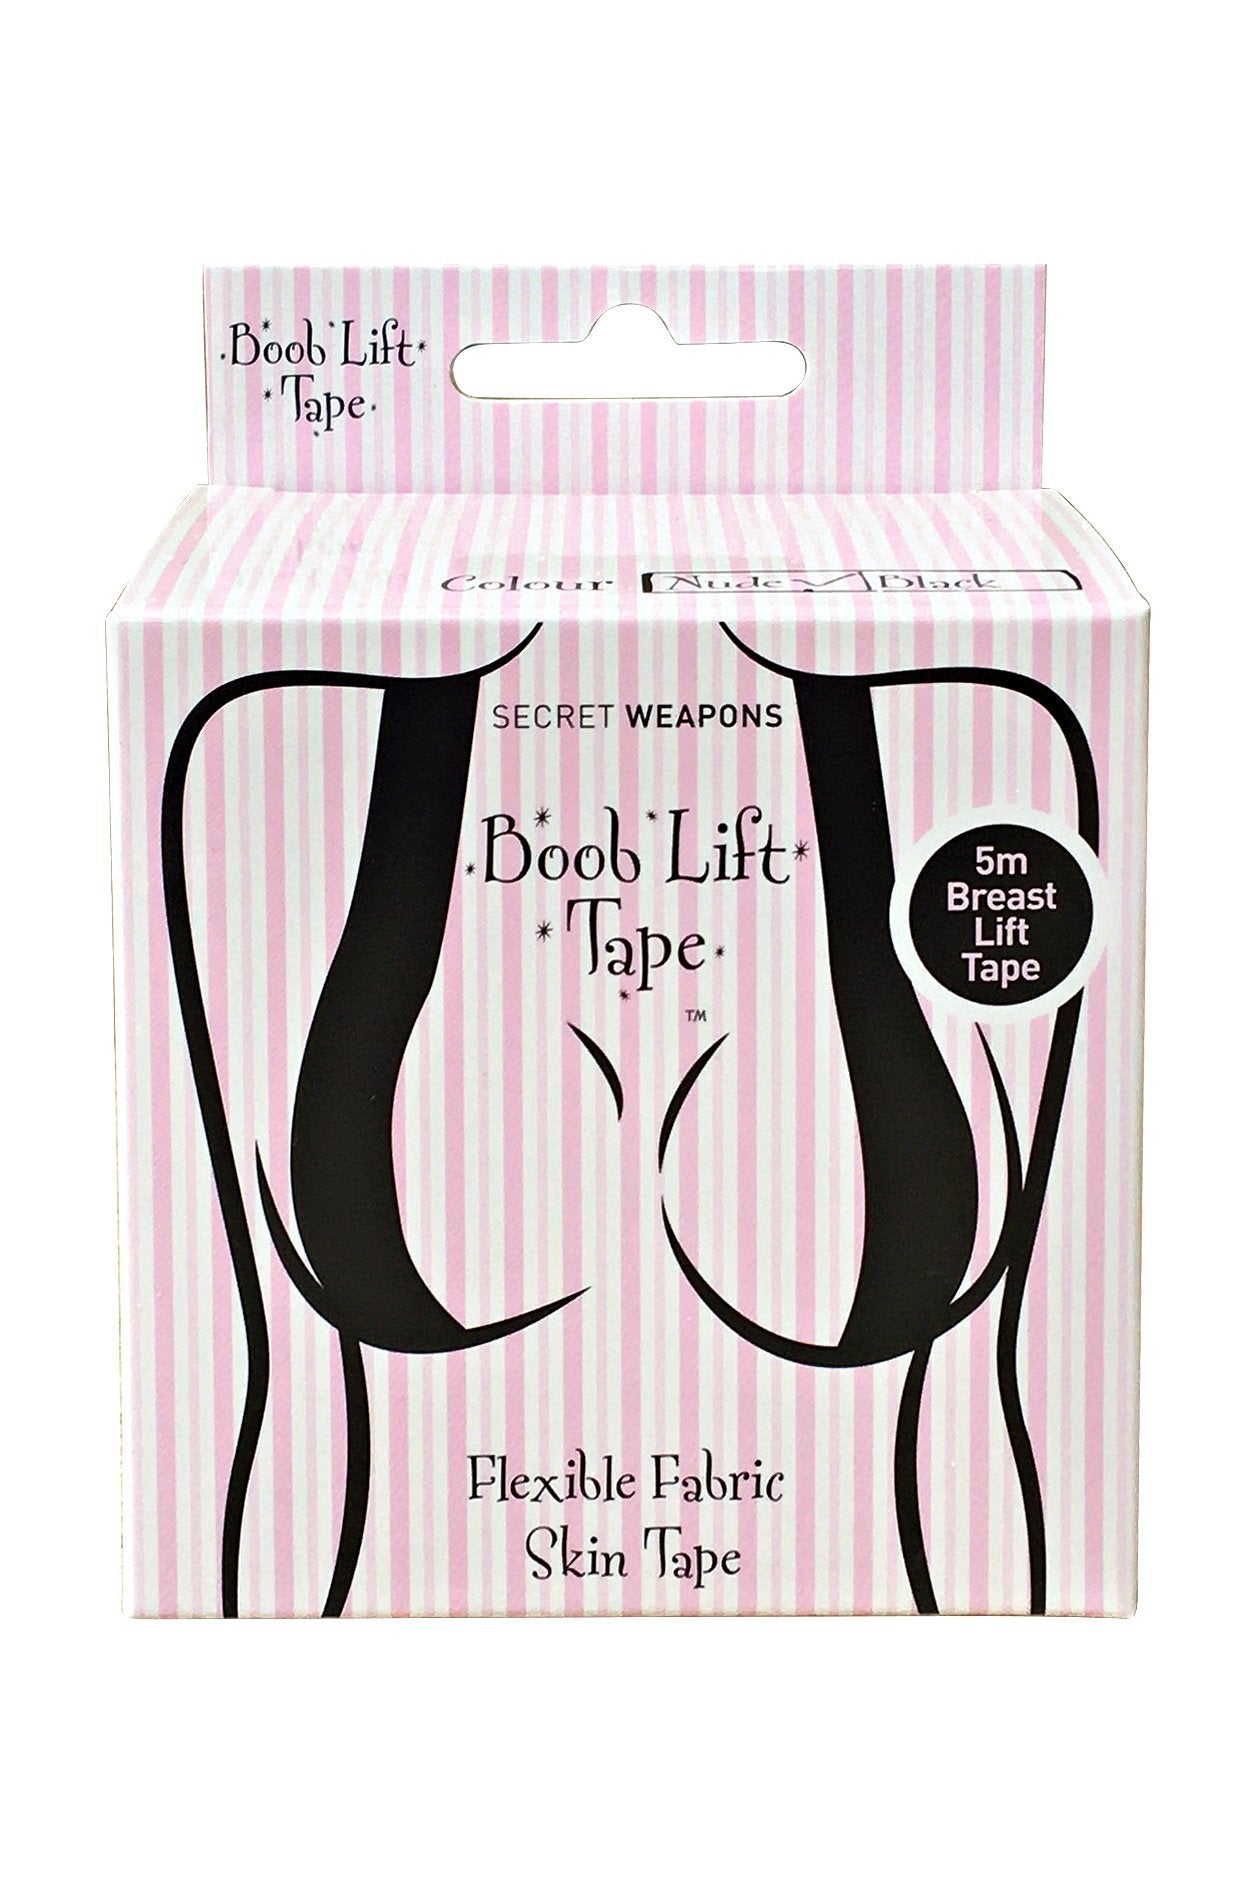 HOLLYWOOD FASHION SECRETS Tape, Dots, Bra Clips, Breast Lift Tape ~ YOU  CHOOSE!